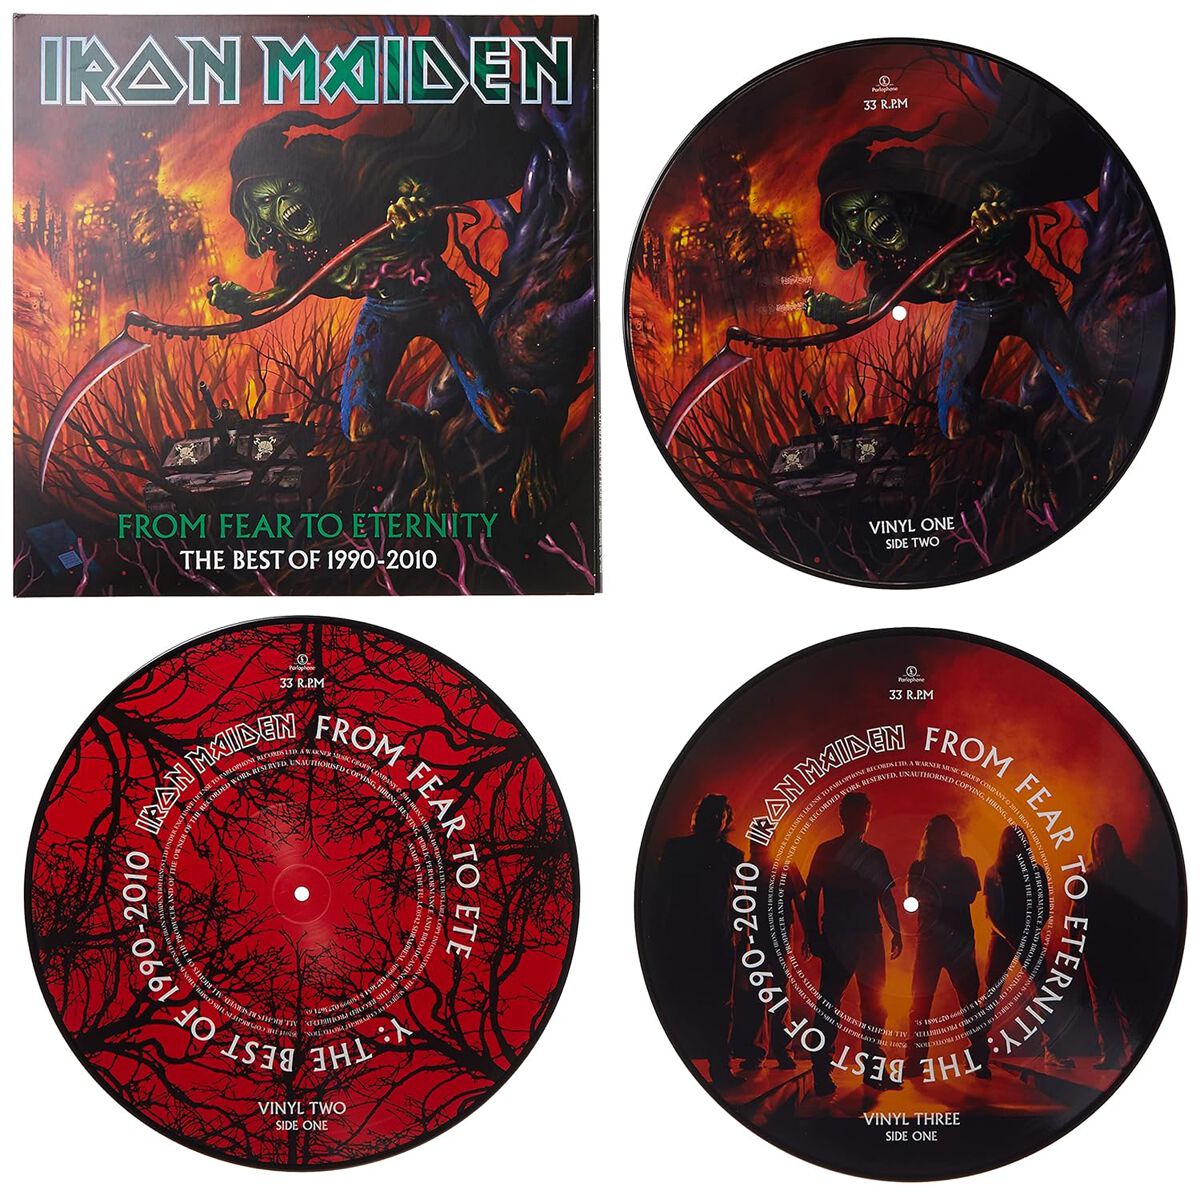 From fear to eternity, Iron Maiden LP